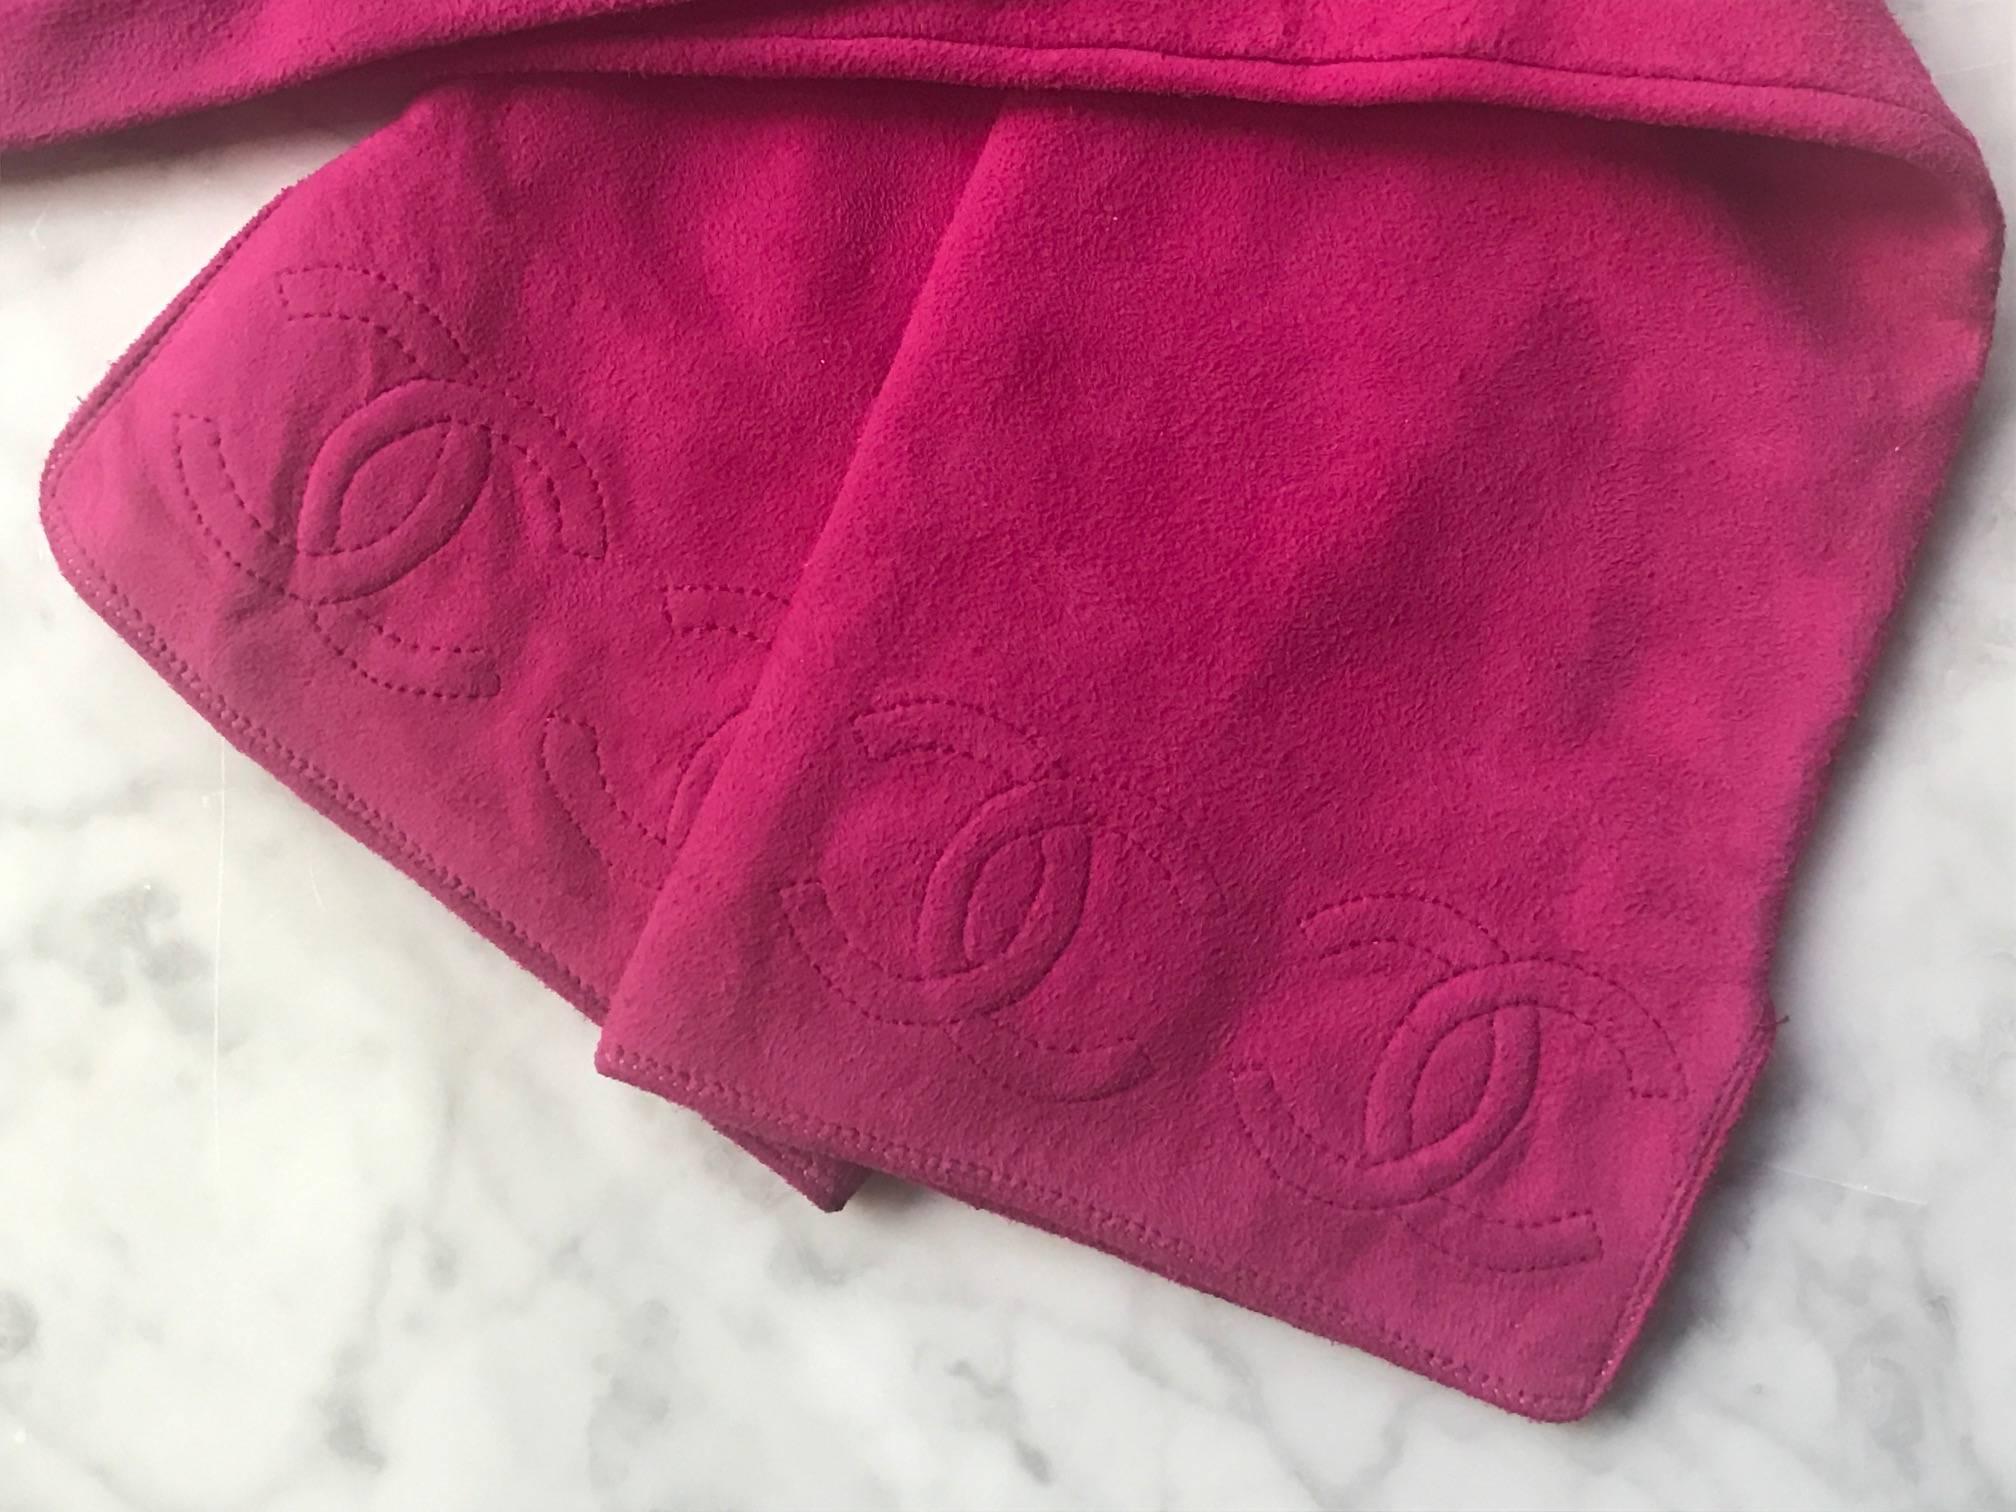 Chanel vintage raspberry suede elbow length gloves. Quilted CC logos on back and front of both sides. Lightly lined.

Stamped 'Chanel' one lining of one glove and size/content/Made in France on other.

Made in France.

Labelled size 7. Seems to 